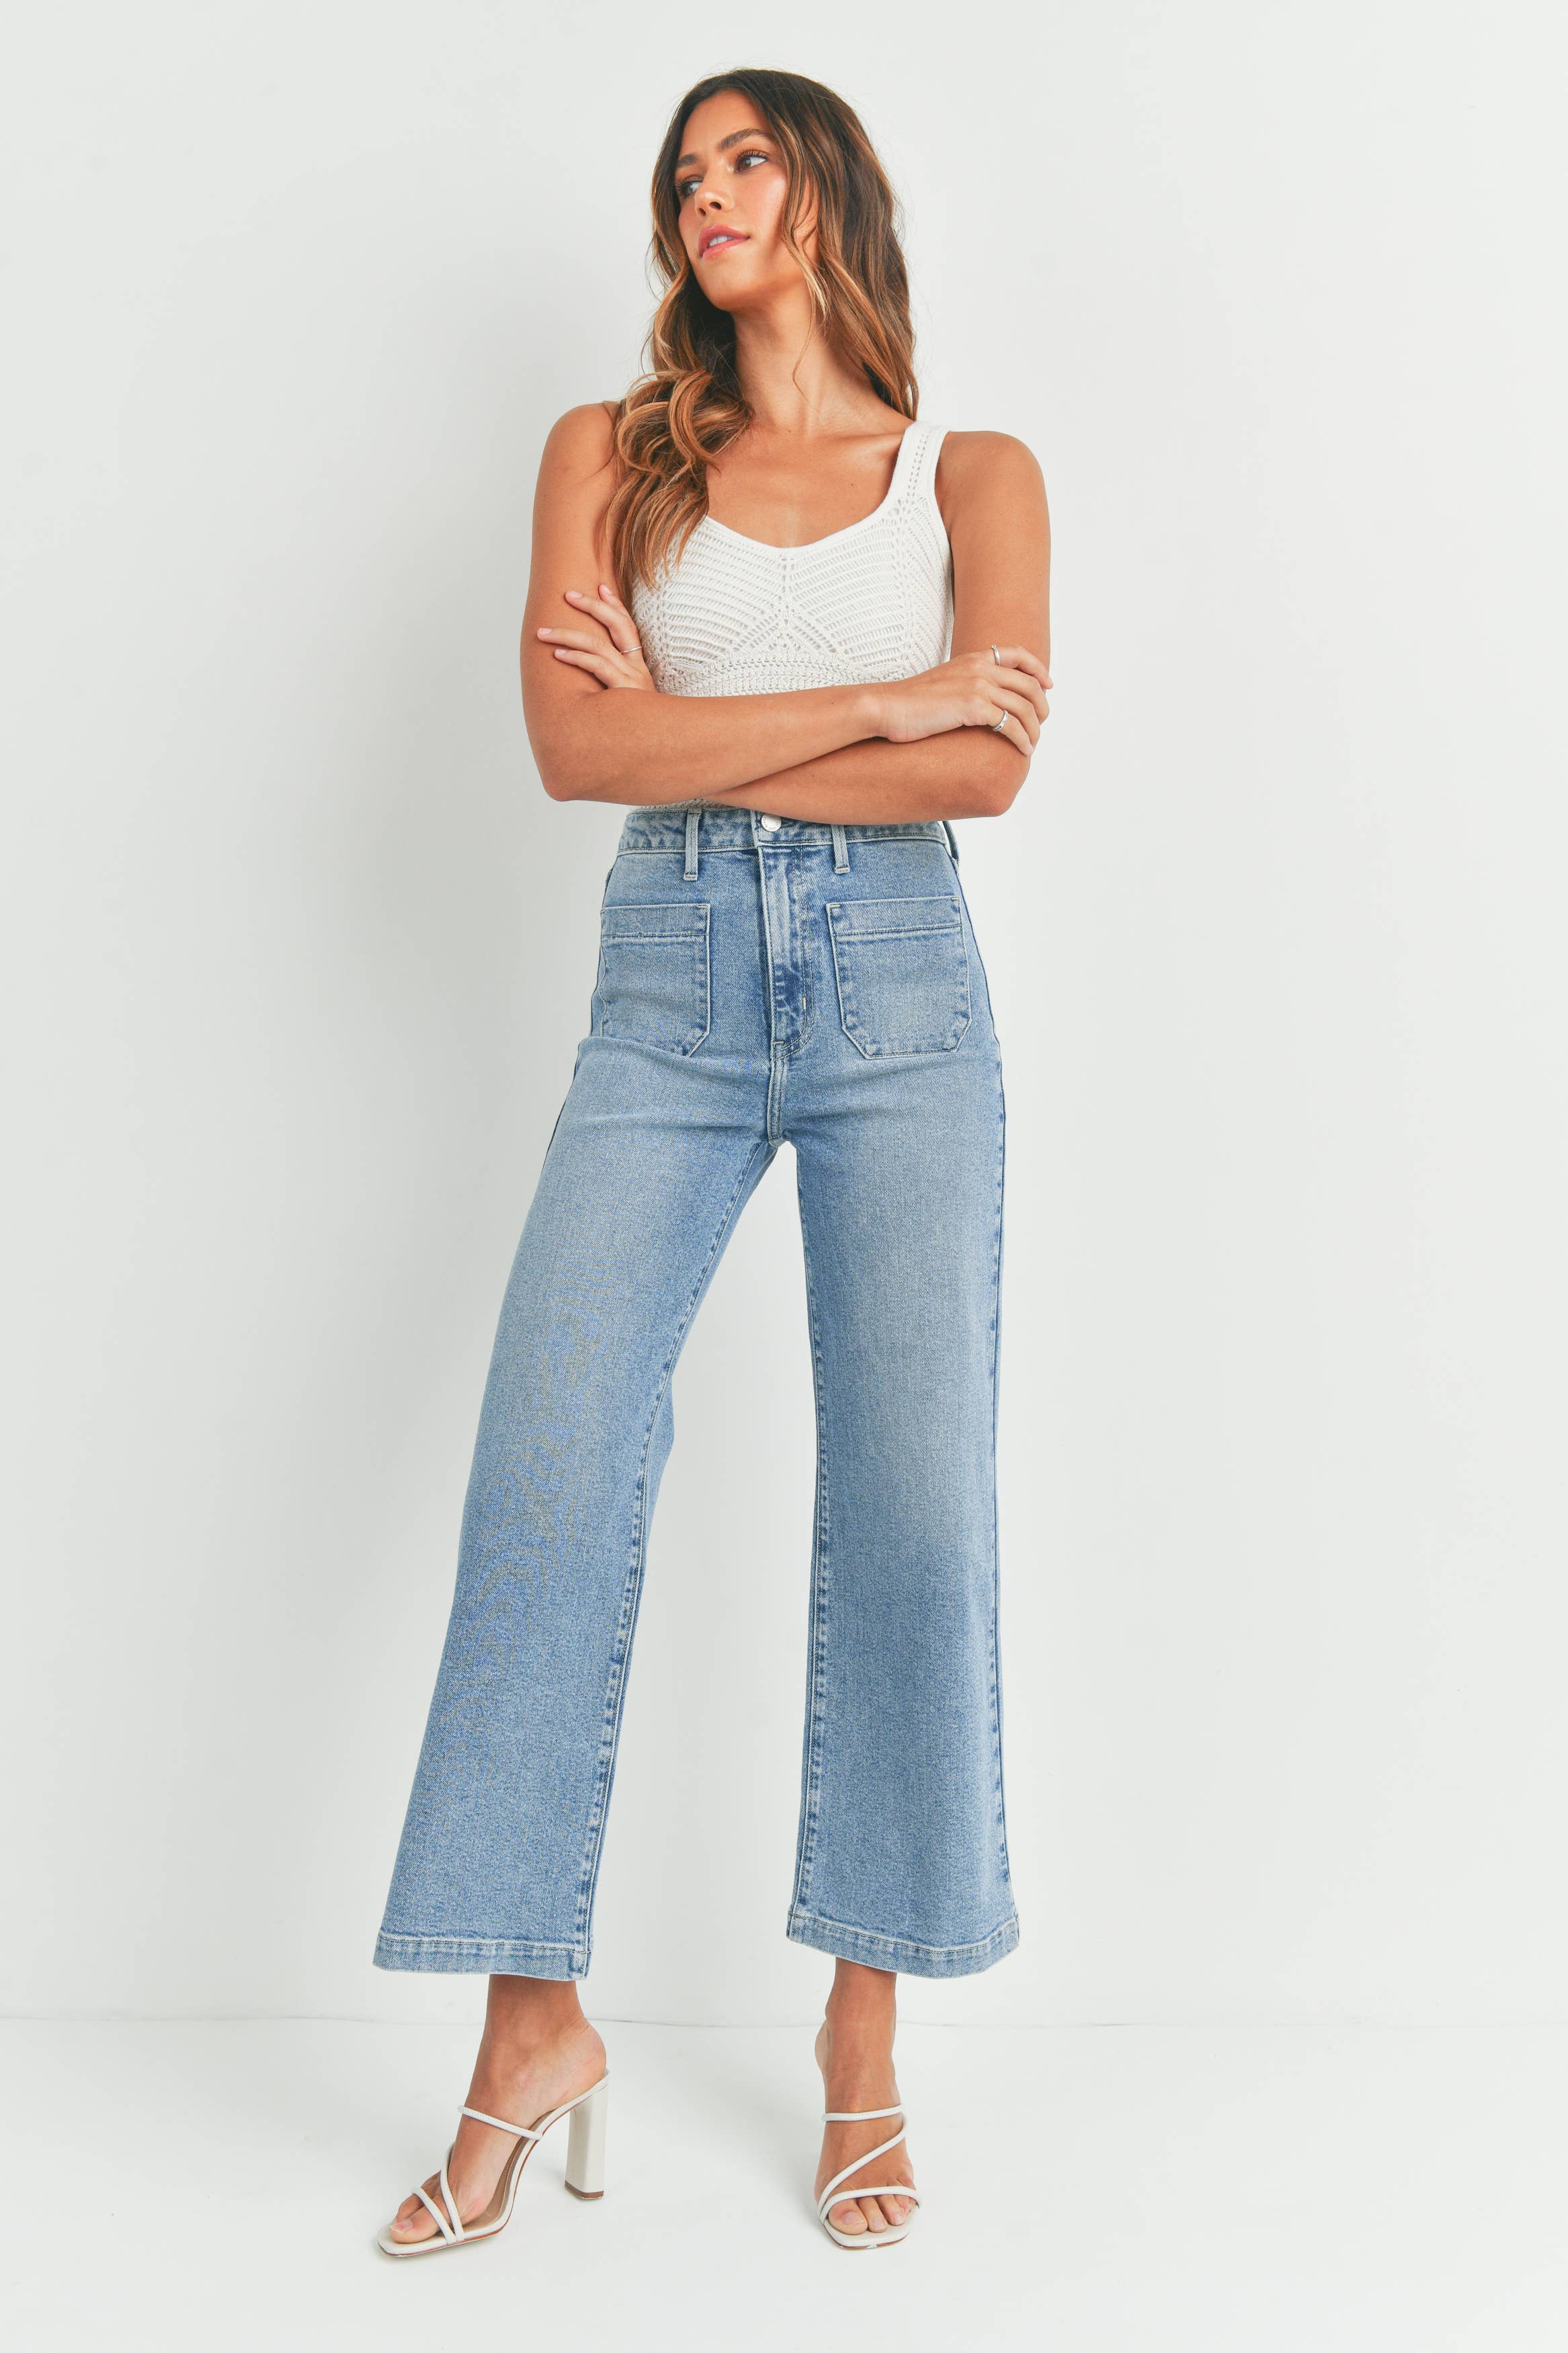 Wholesale Jeans for your store